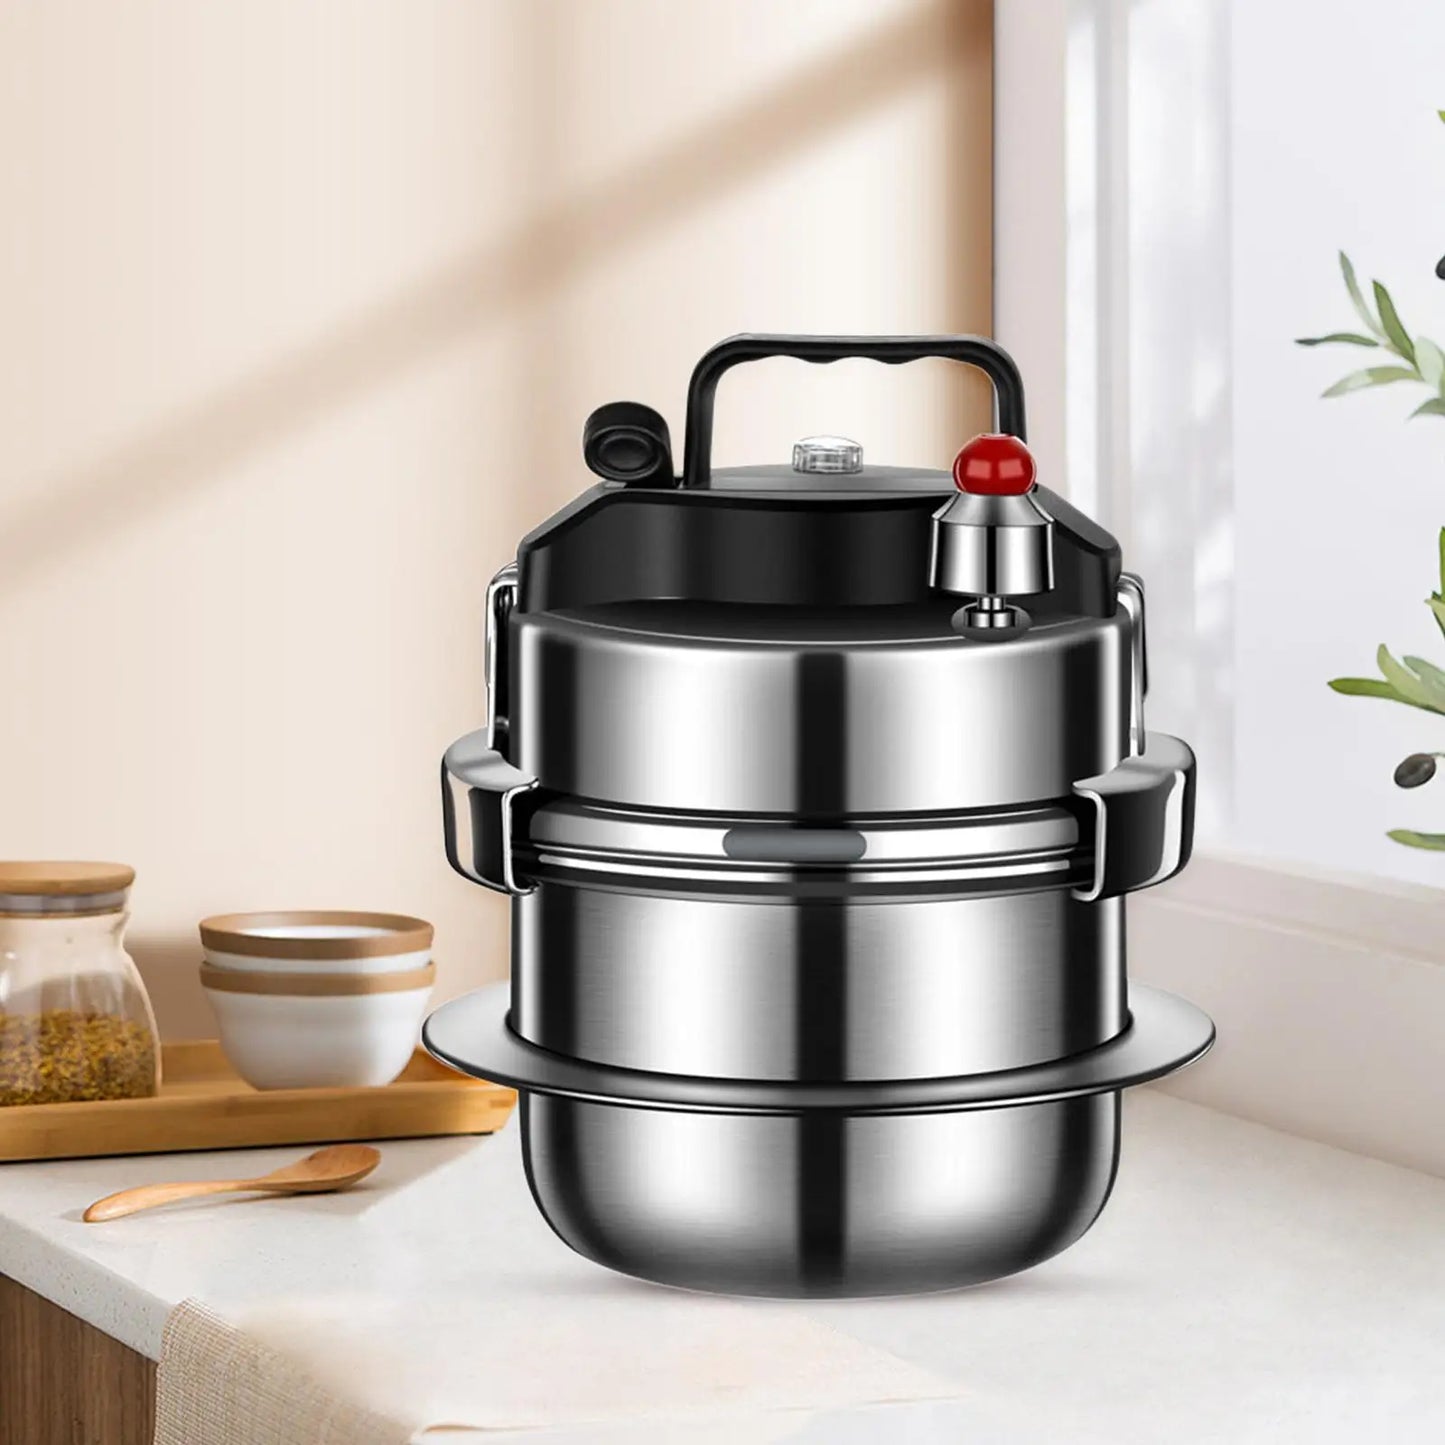 Micro Pressure Cooker Camping Universal Cookware Travel Family Outdoor Multifunction 5 Minutes Quickly Cooking Rice Cooker